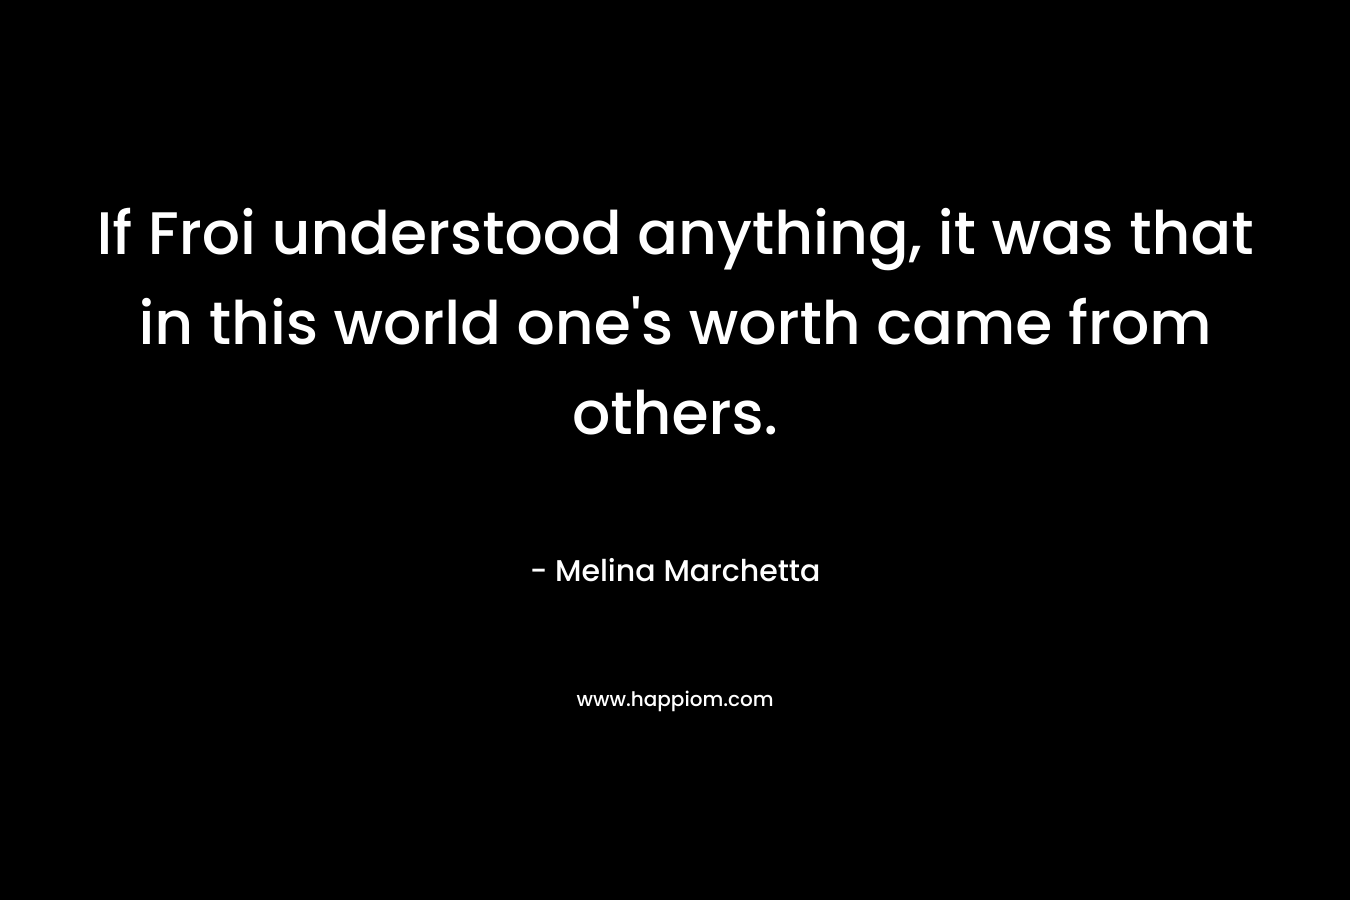 If Froi understood anything, it was that in this world one’s worth came from others. – Melina Marchetta